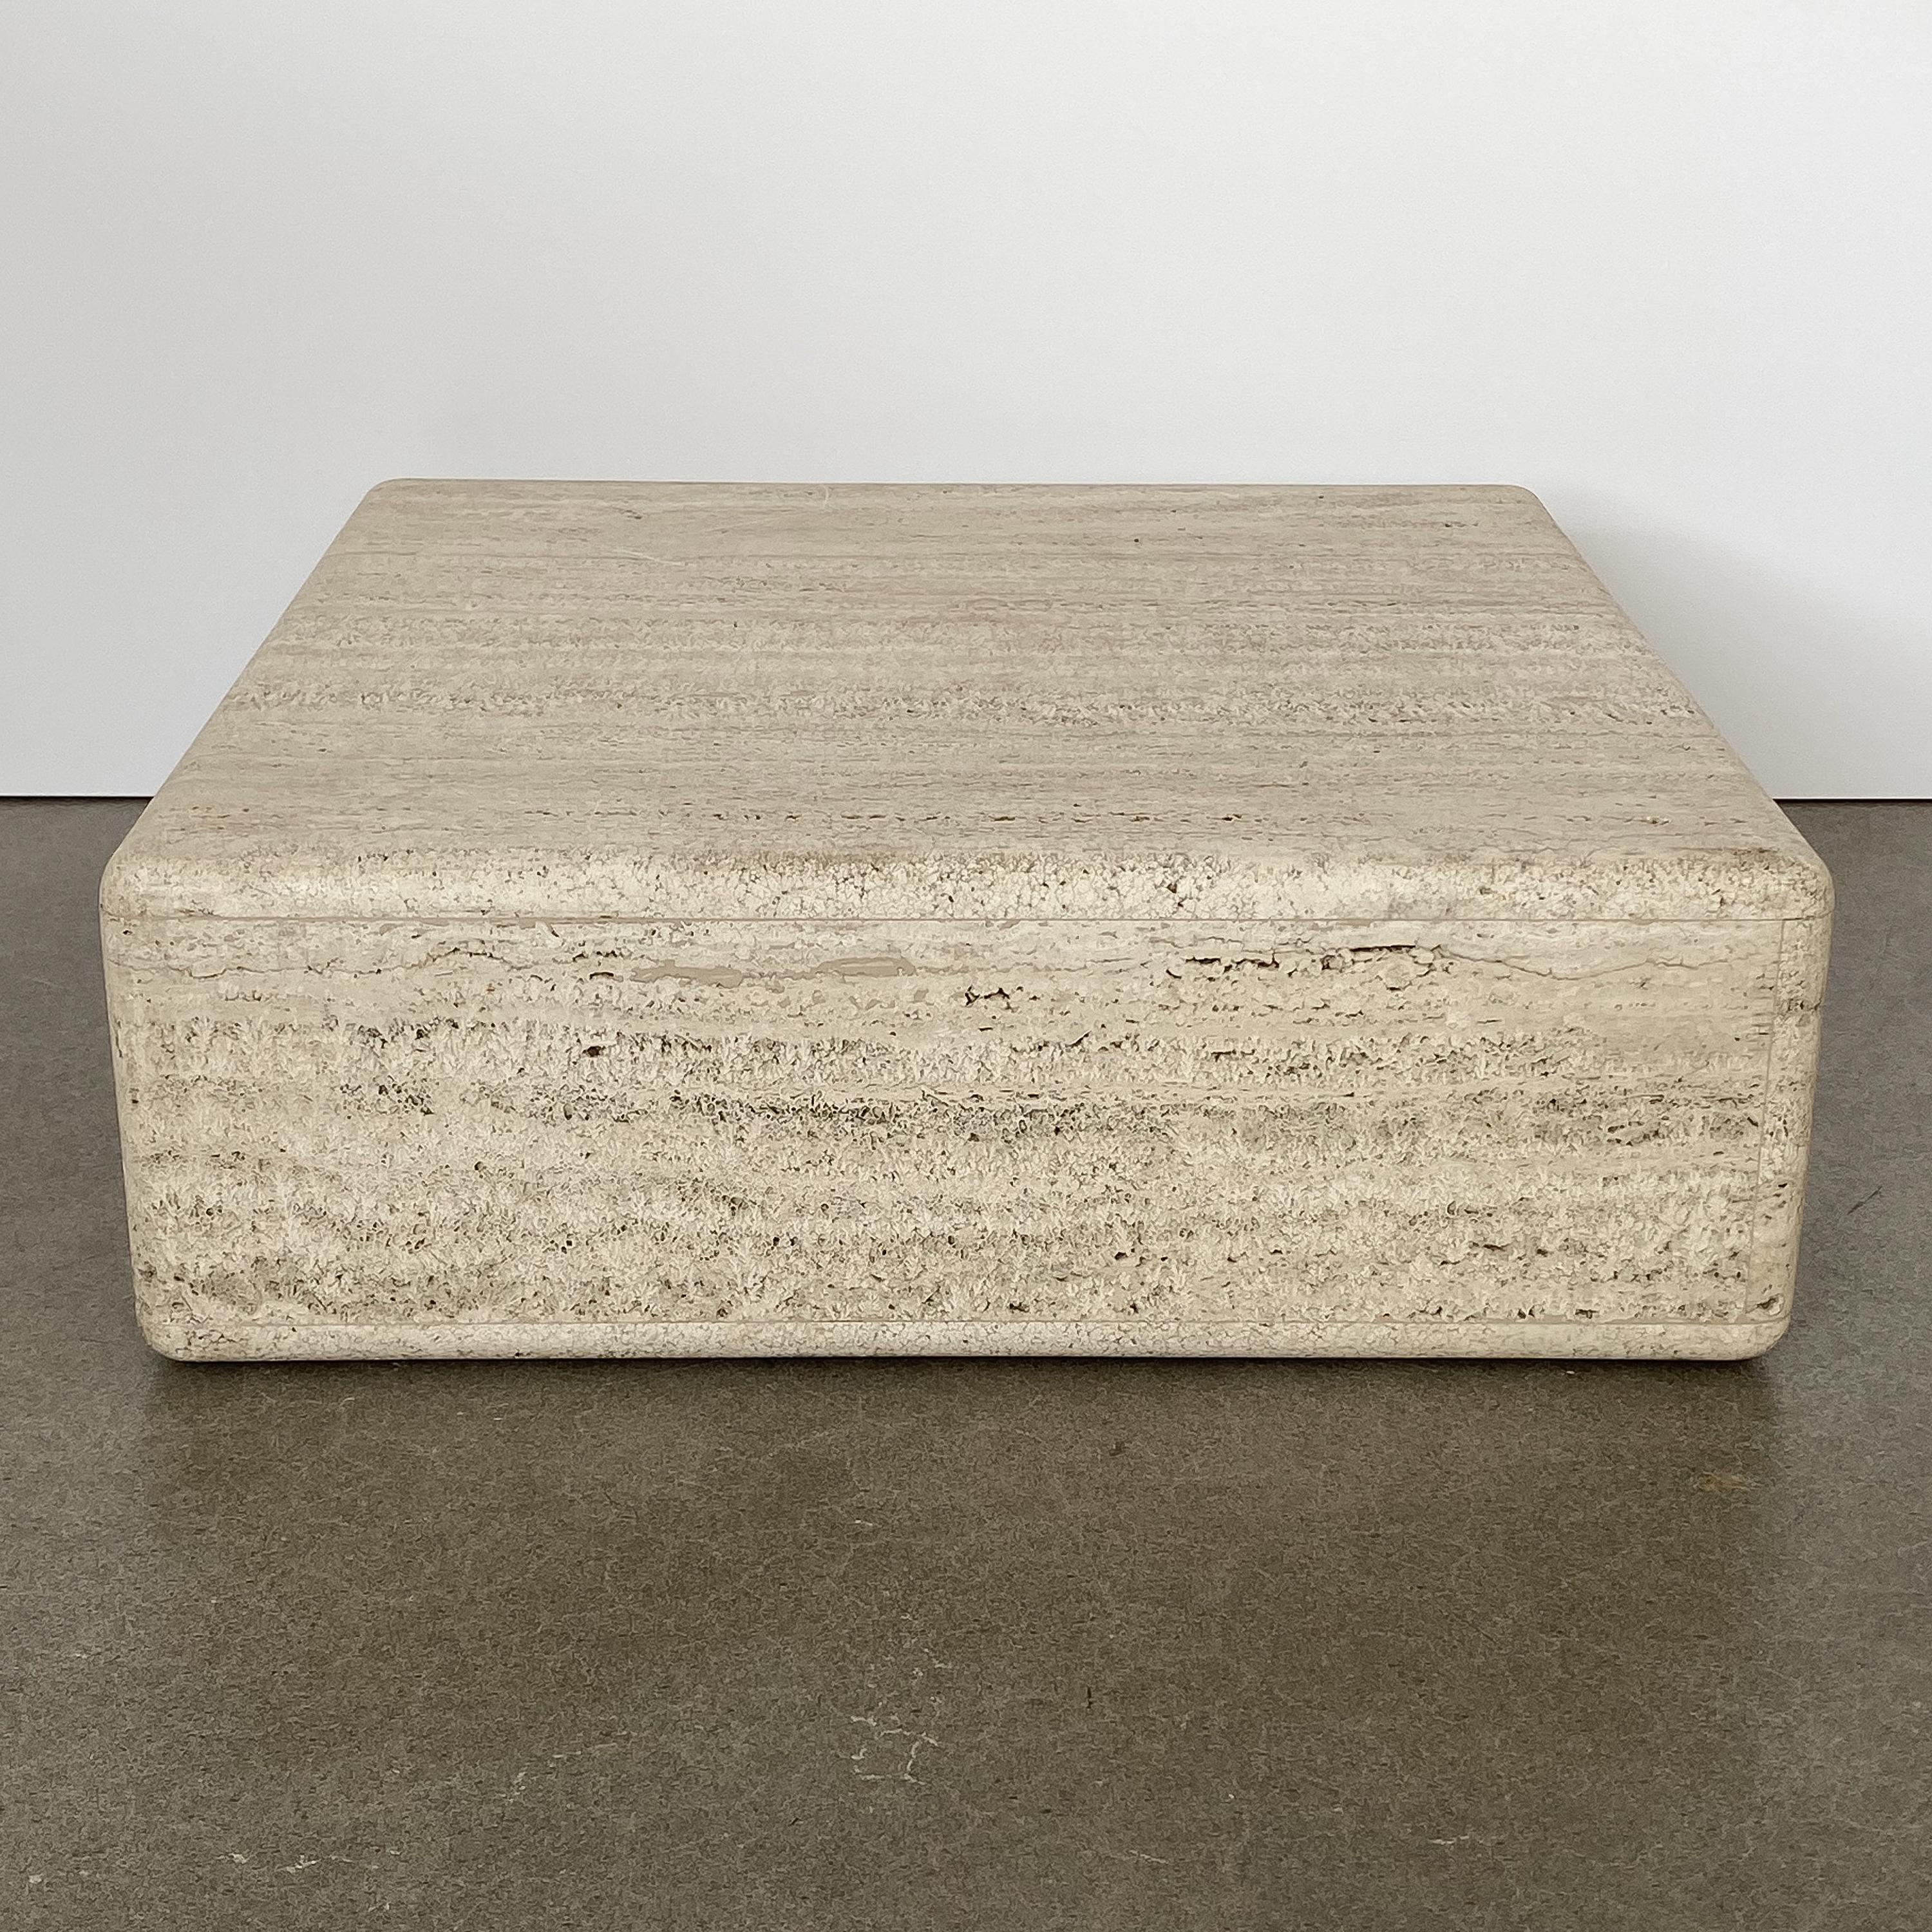 Two-Piece Travertine Cube Tiered Coffee Table 11